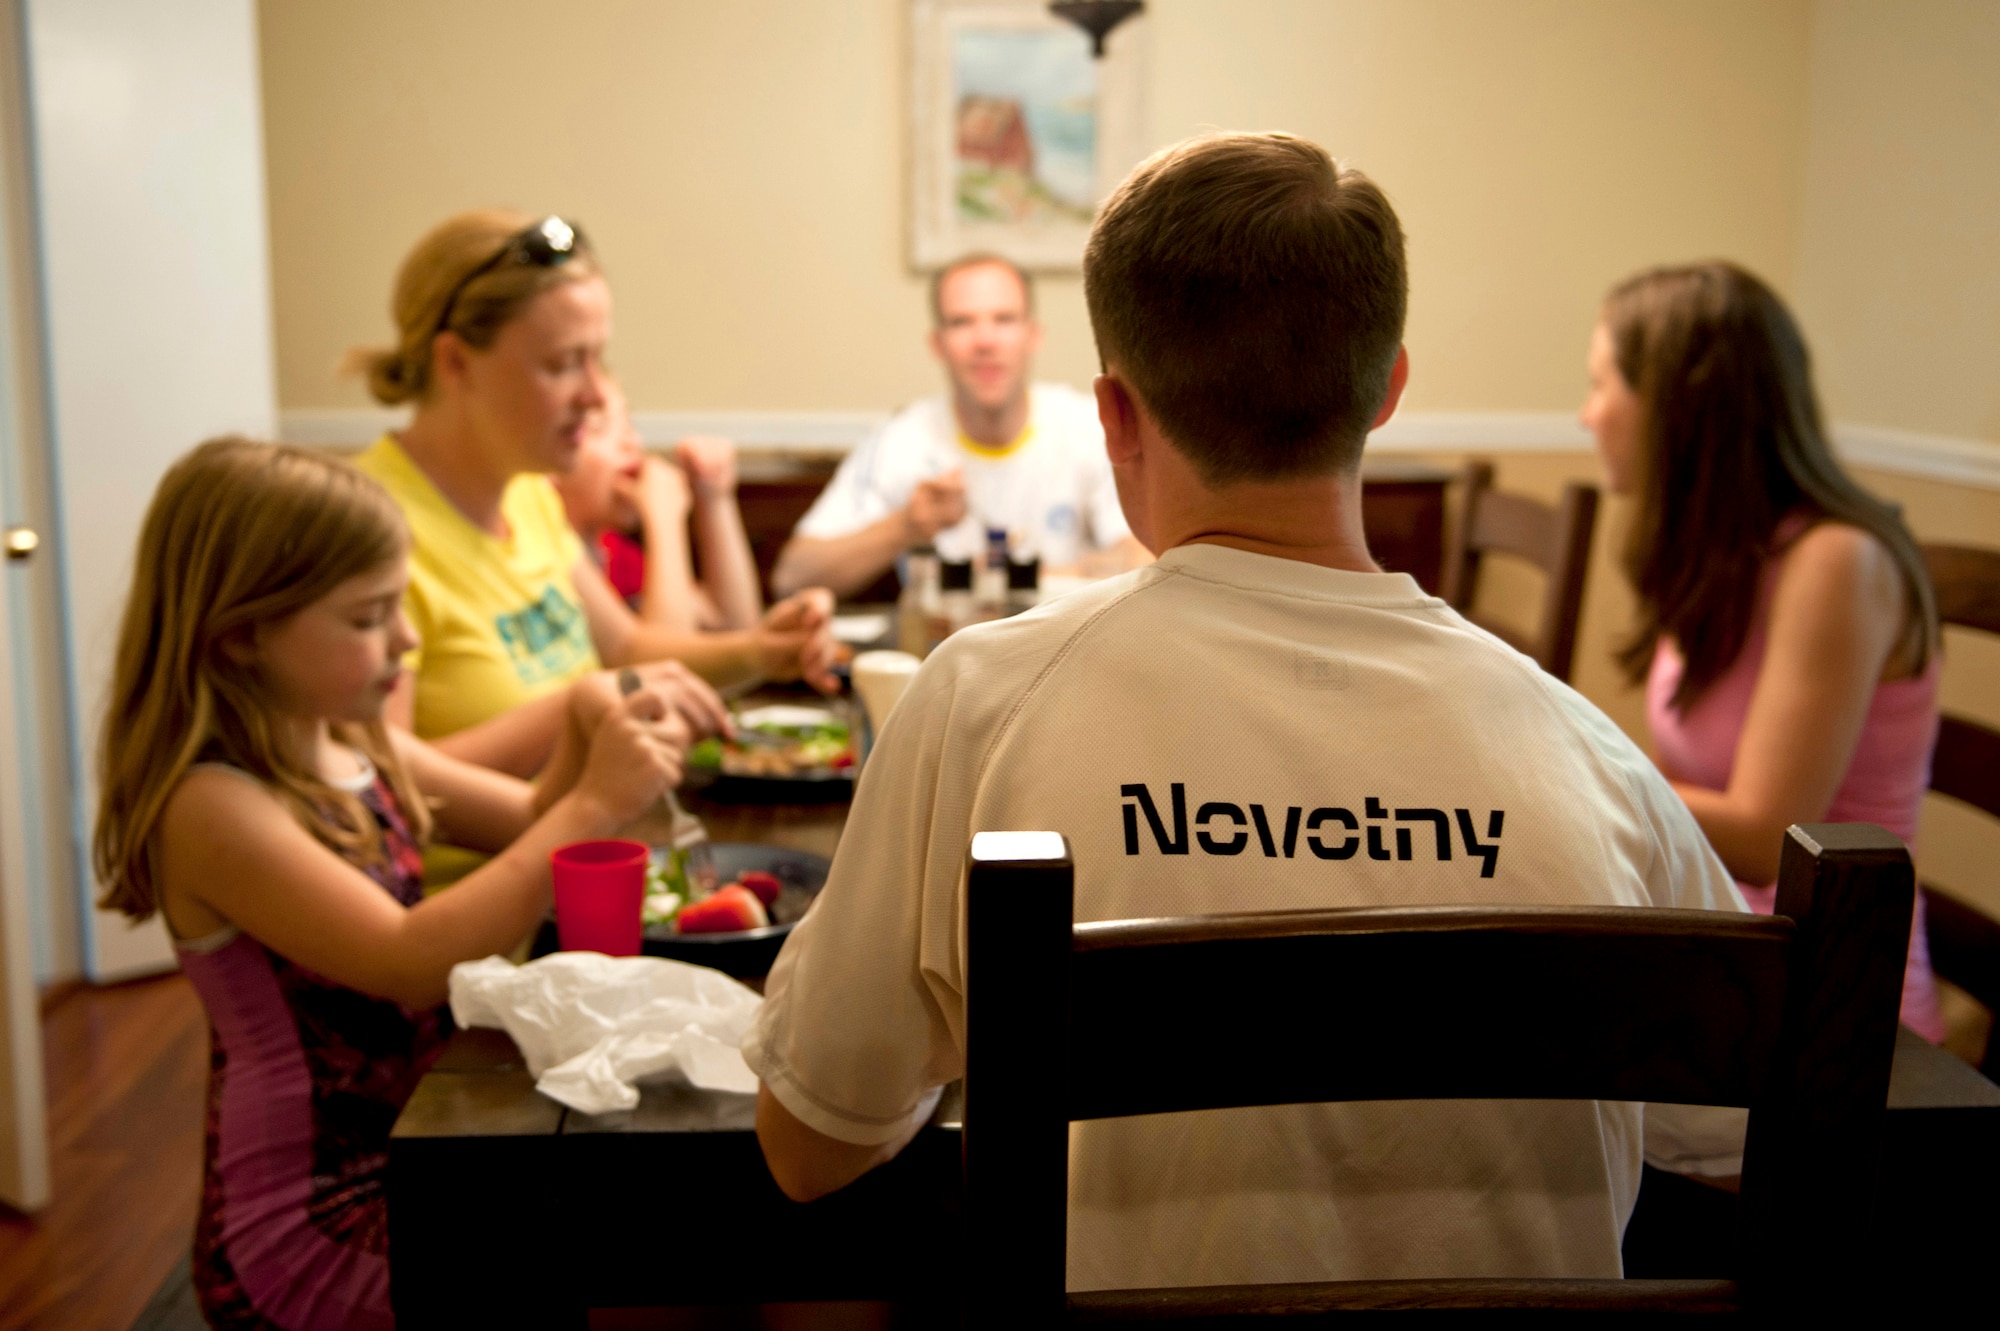 The Novotny family gathers around the table before brothers, Lt. Col. Ryan and Maj. Reid Novotny get together for a marathon run. (Air Force photo/Senior Airman Carlin Leslie)